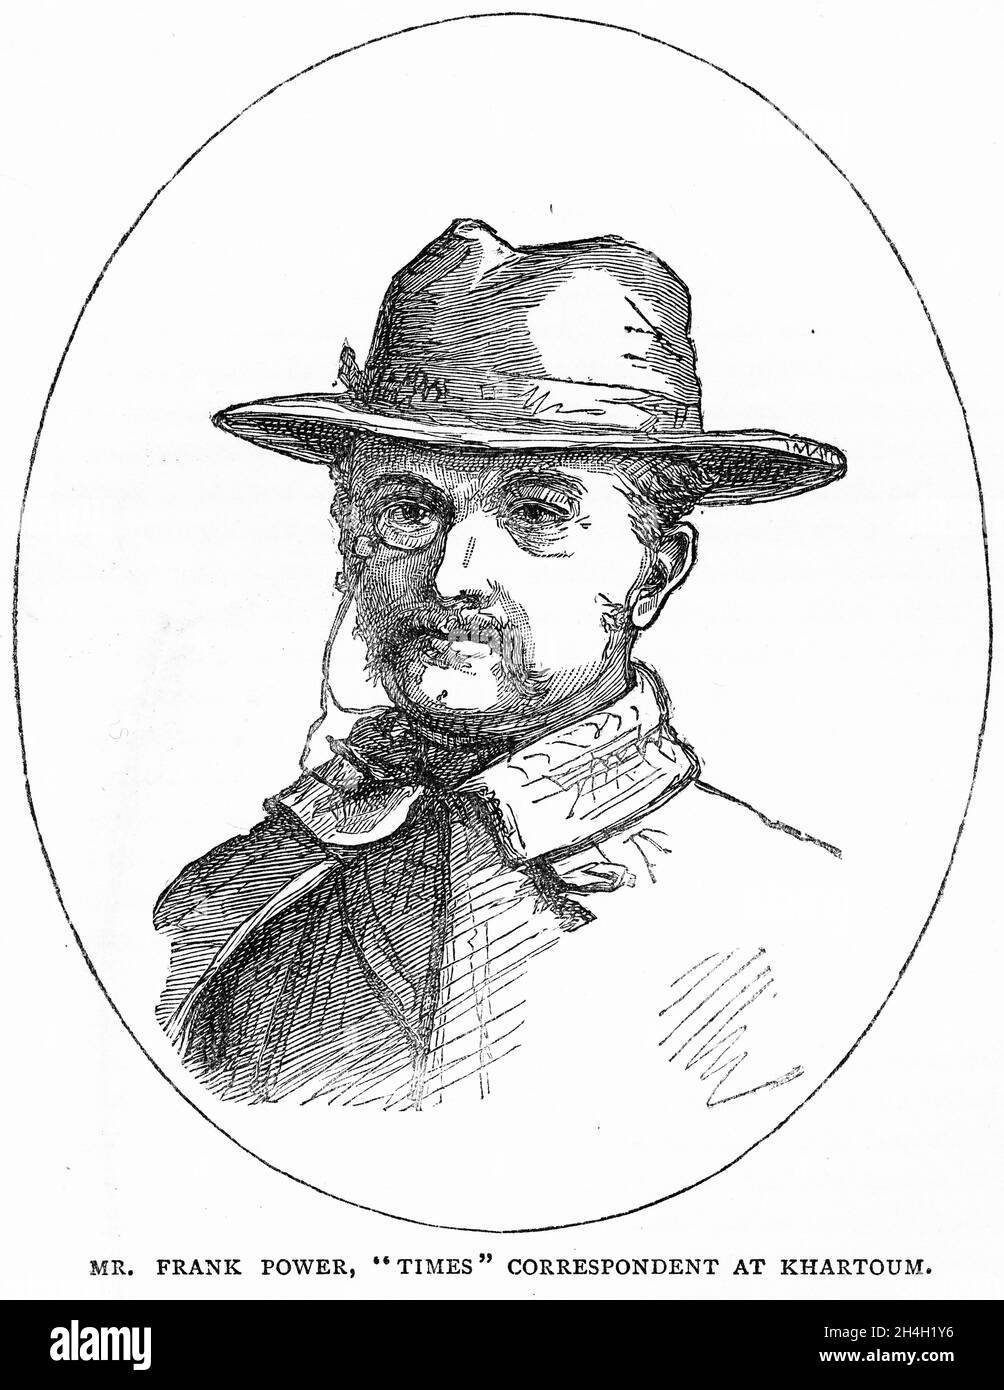 Engraving of Frank Power, correspondent for The Times newspaper of London during General Grant's defence of Khartoum Stock Photo